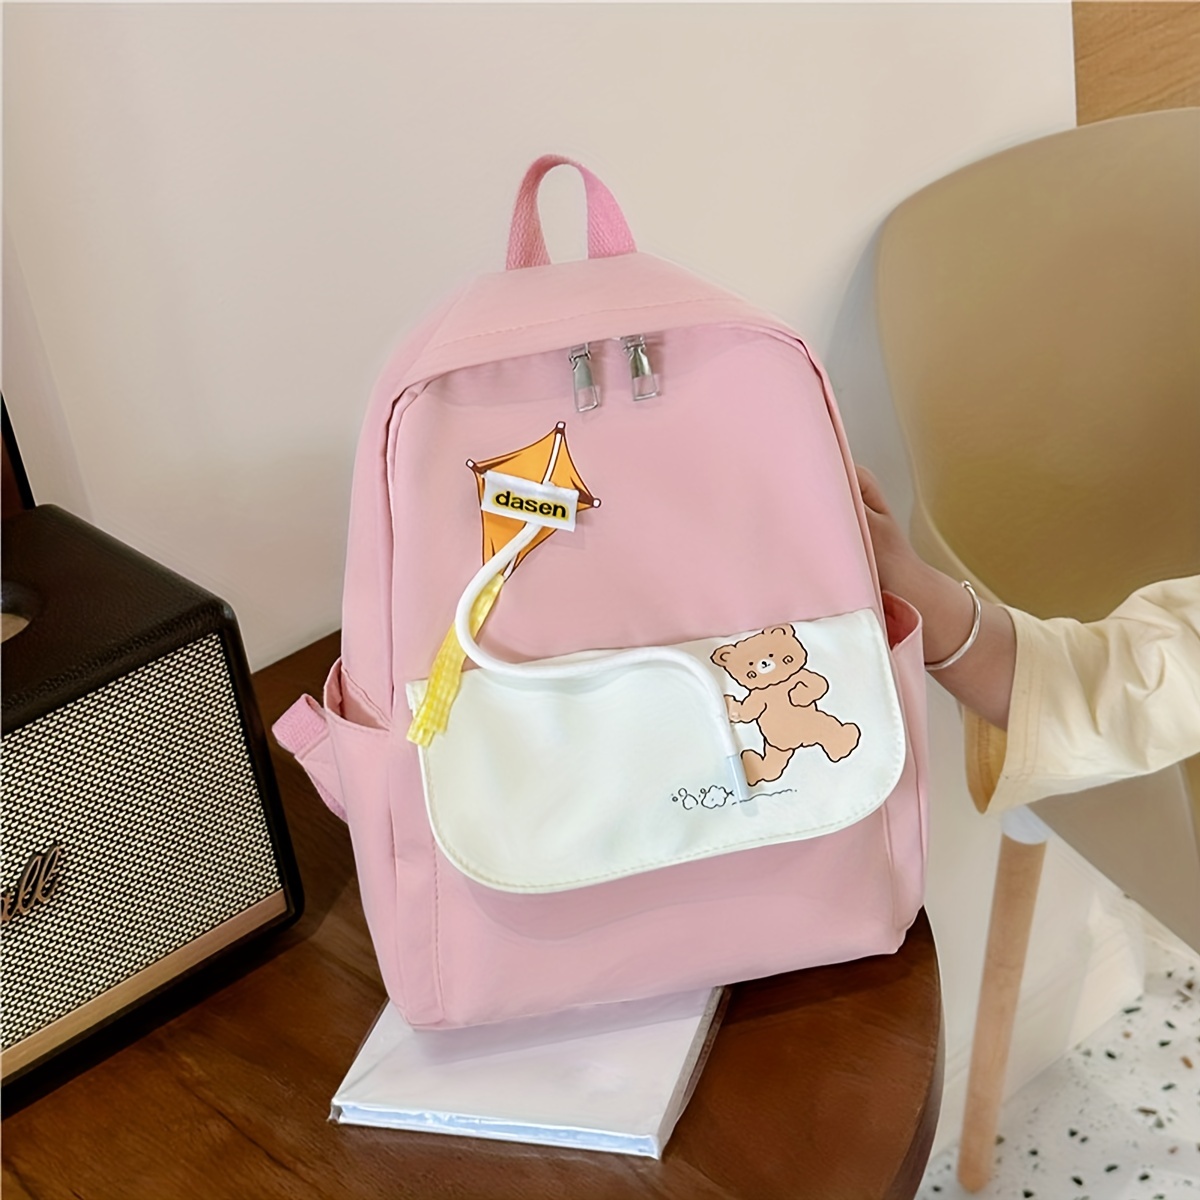 Fashionable Casual Canvas Backpack With Letter Print And Cute Bear Pattern,  School Bag